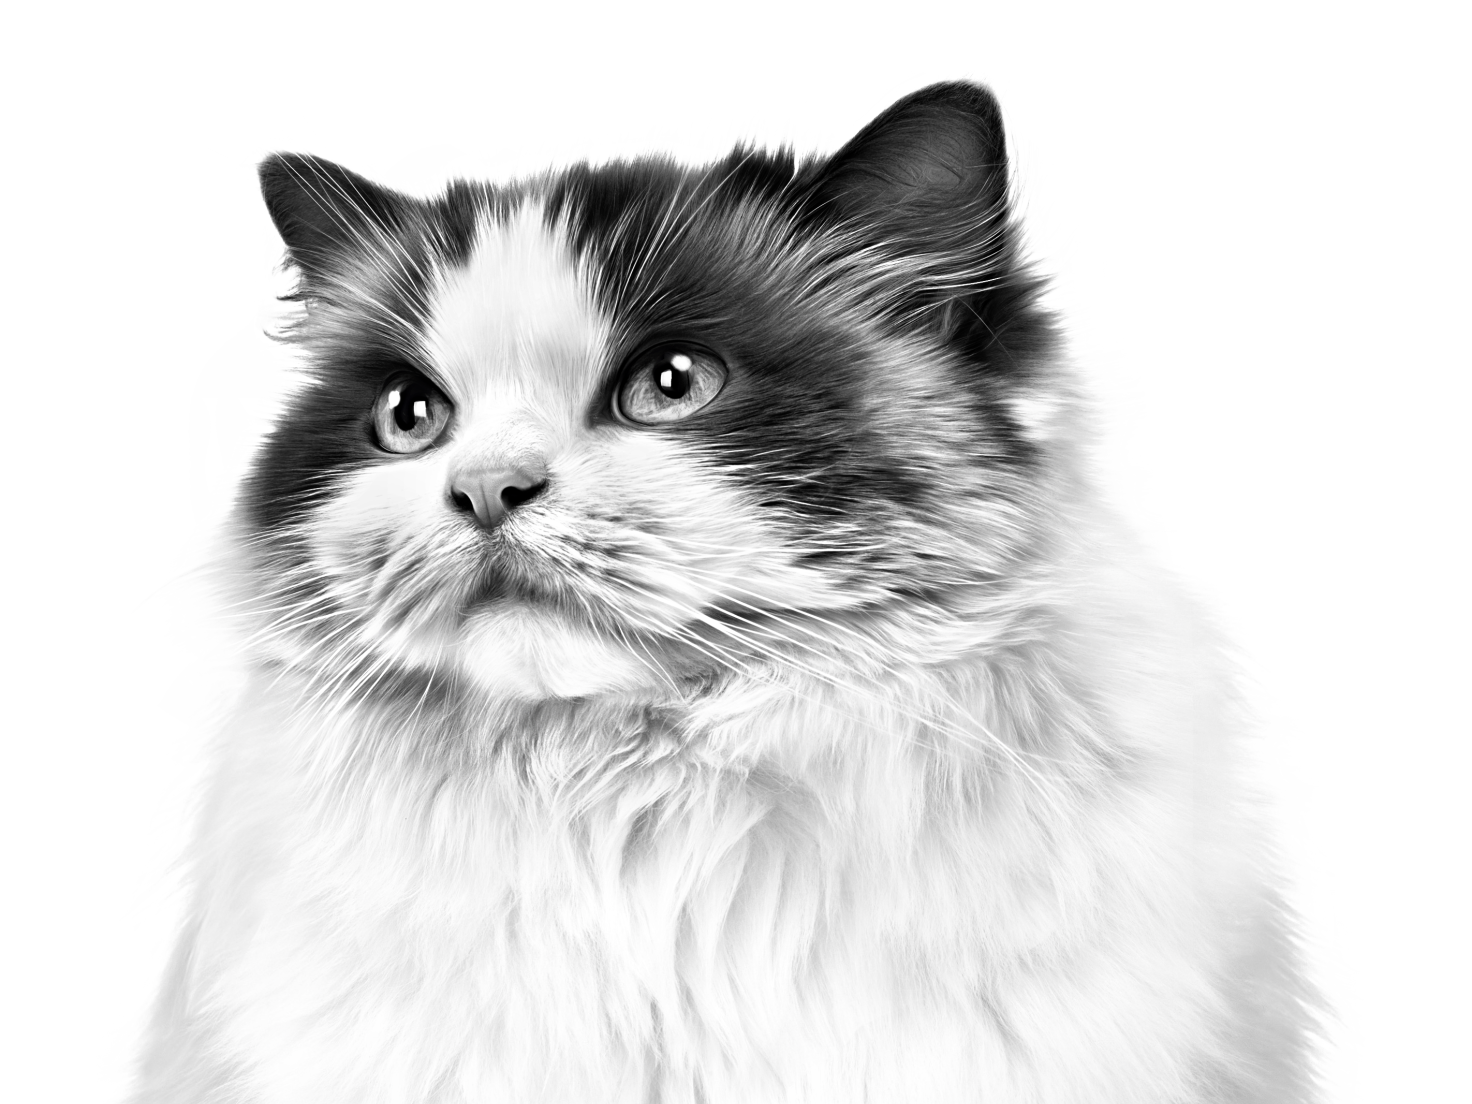 Black and white portrait of a Ragdoll cat